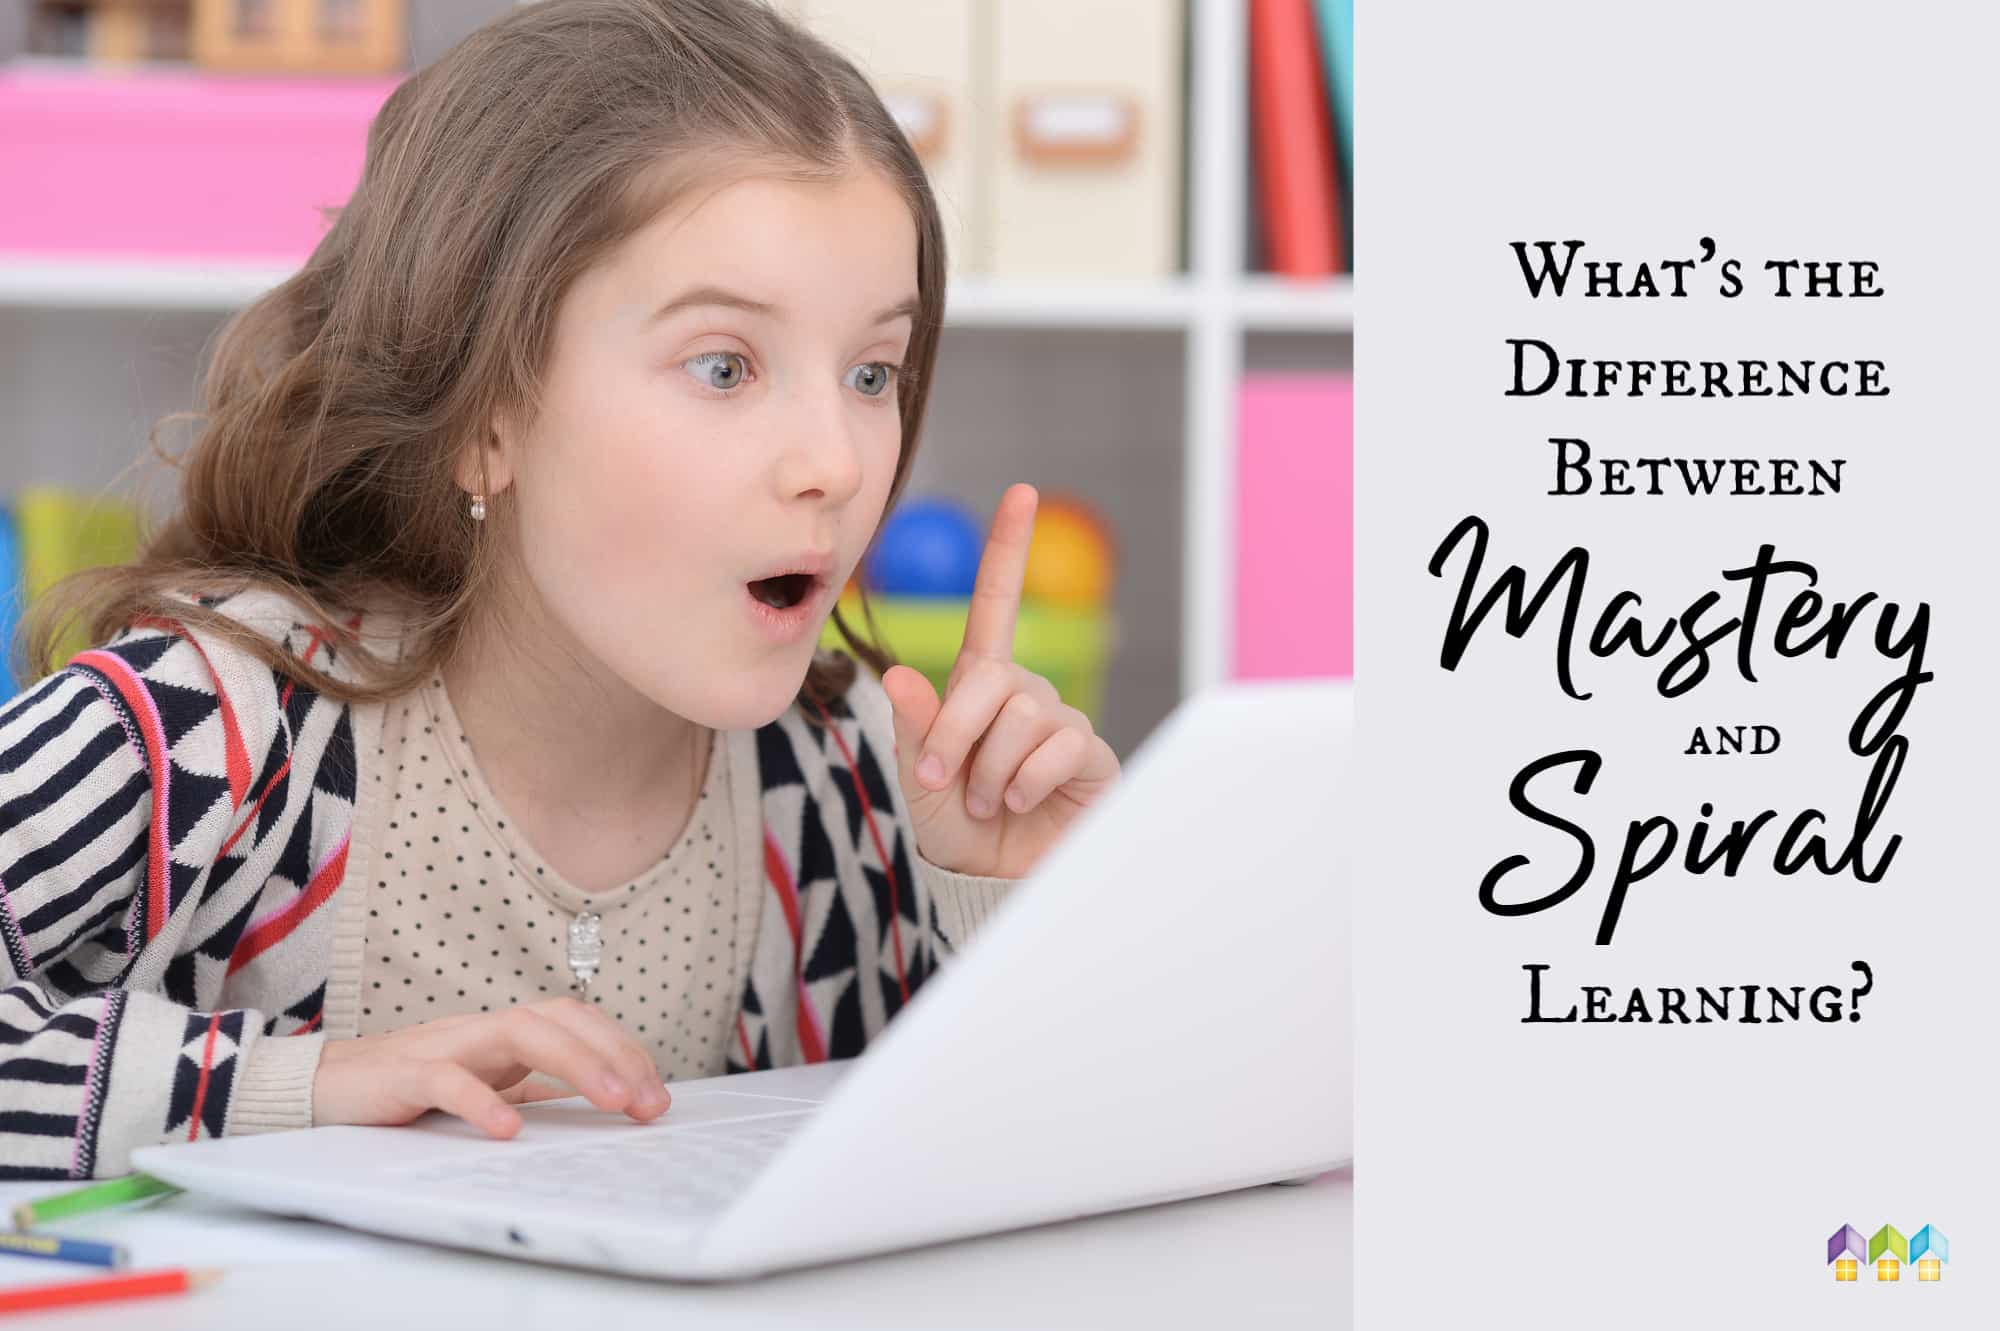 What’s the Difference Between Mastery and Spiral Learning?